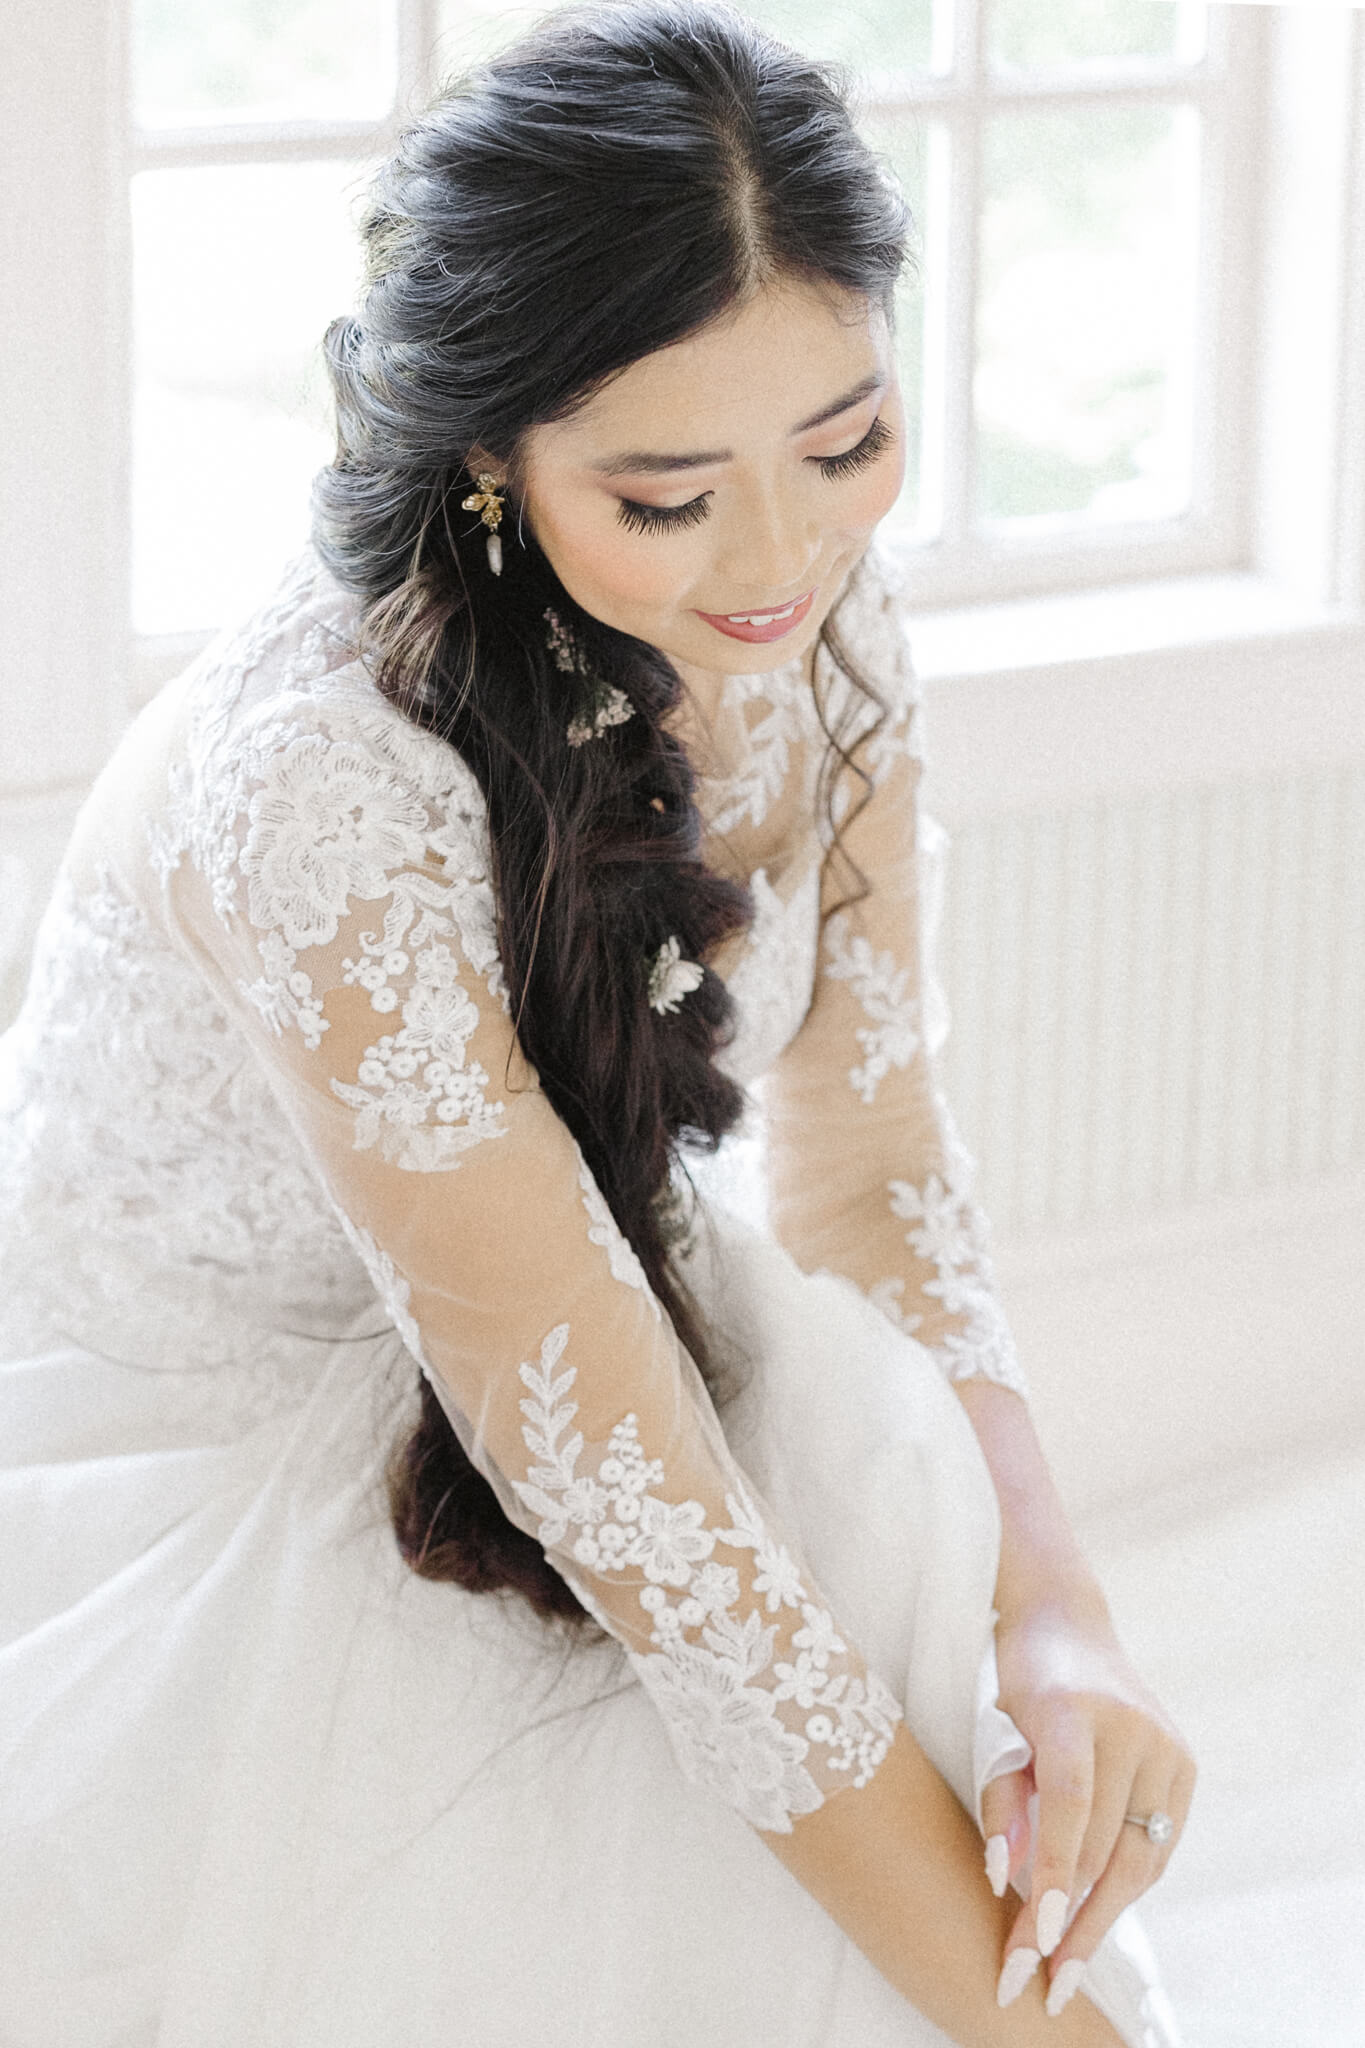 fine art photograph of bride in lace gown leaning forward